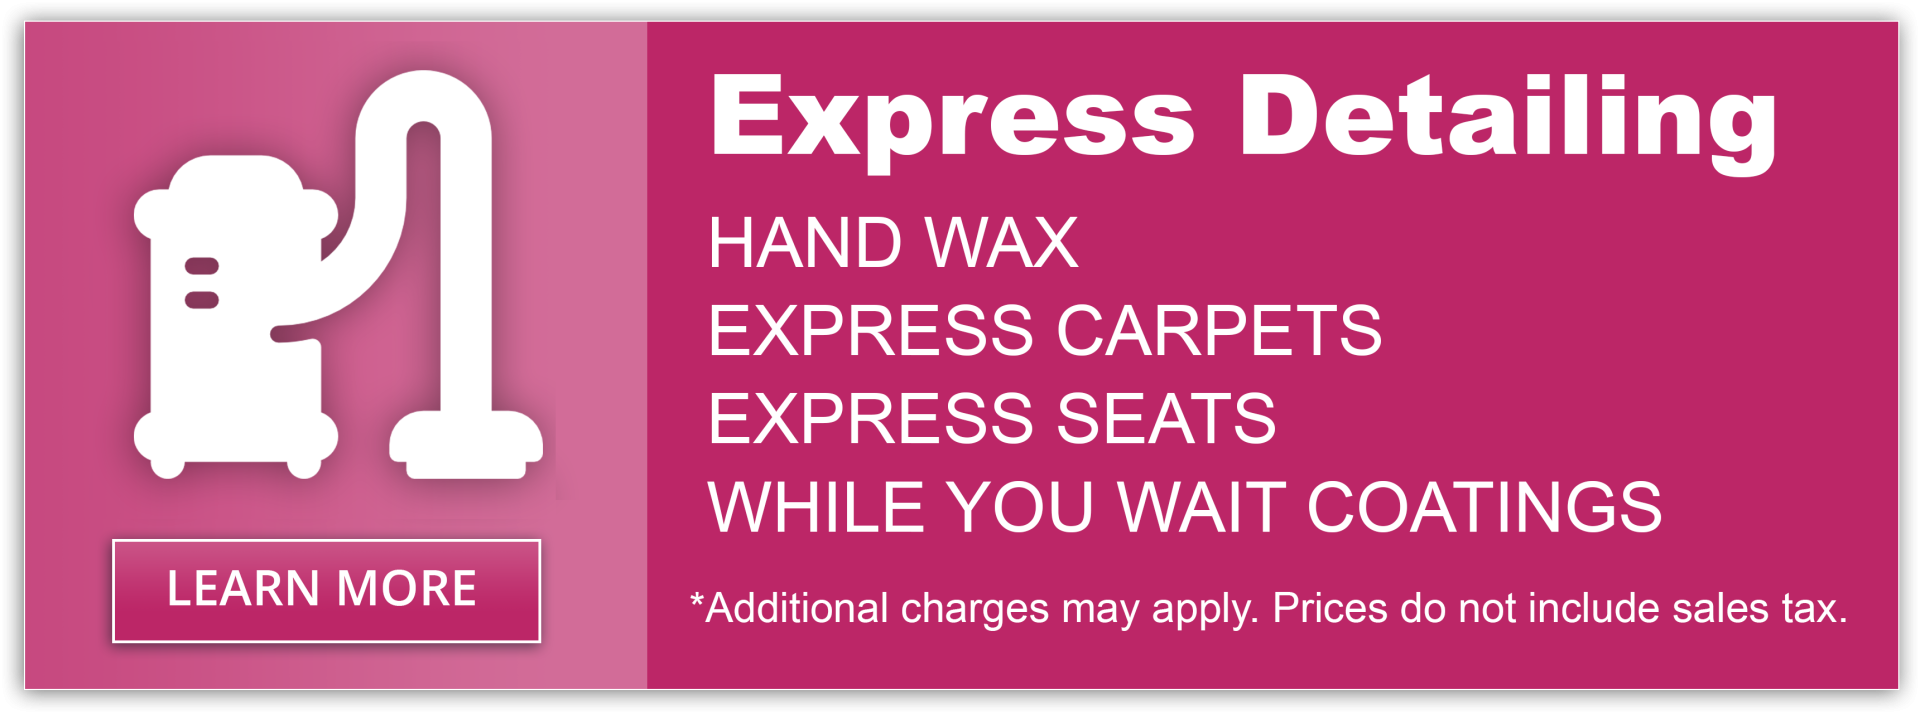 Express Detailing. Hand Wax. Express Carpets. Express Seats. While you wait coatings. * Additional charges may apply. Prices do not include sales tax.